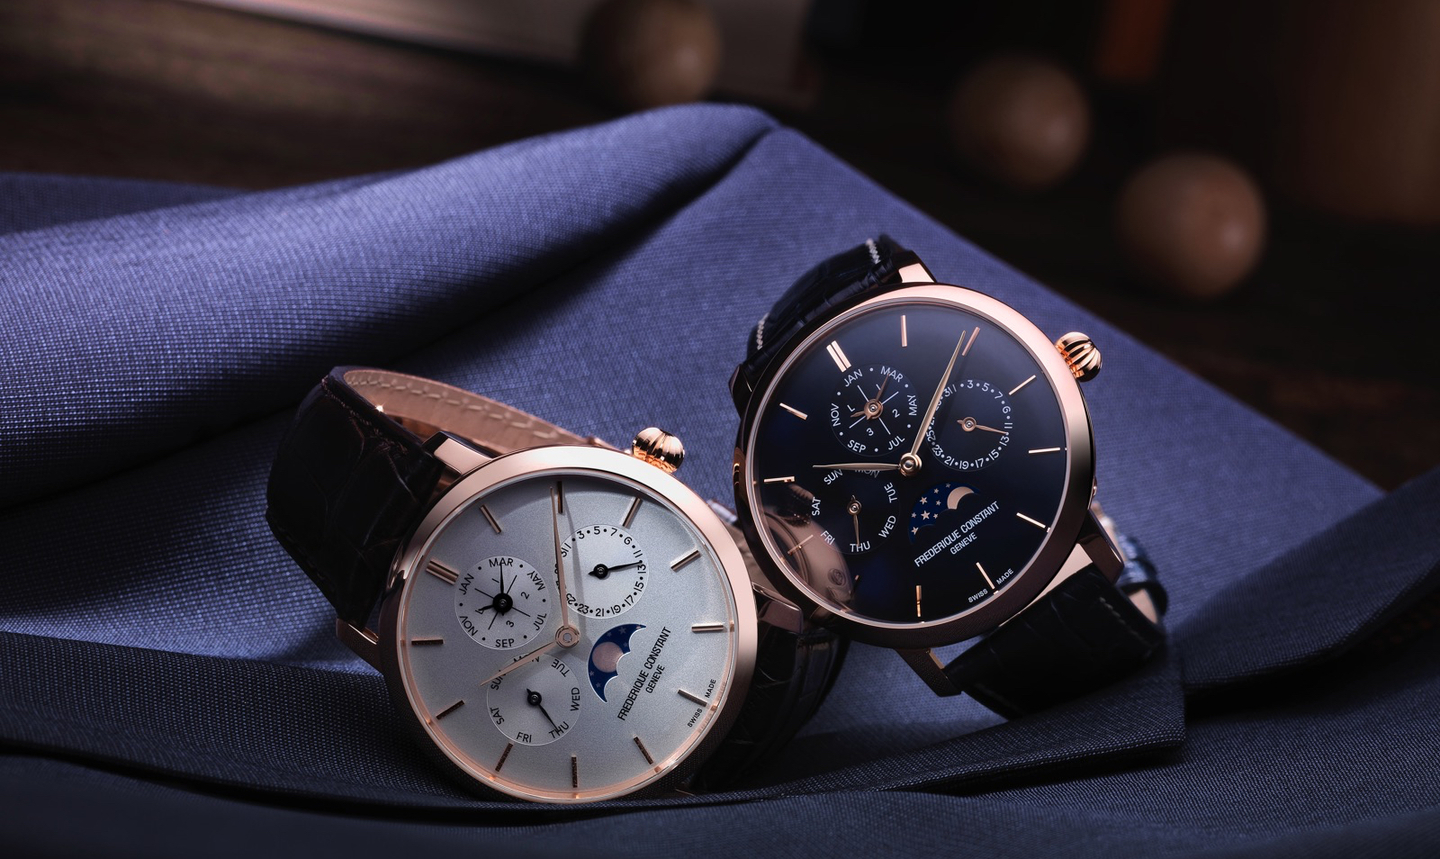 Frederique Constant Slimline Manufacture Perpetual Calendar At Baselworld 2016